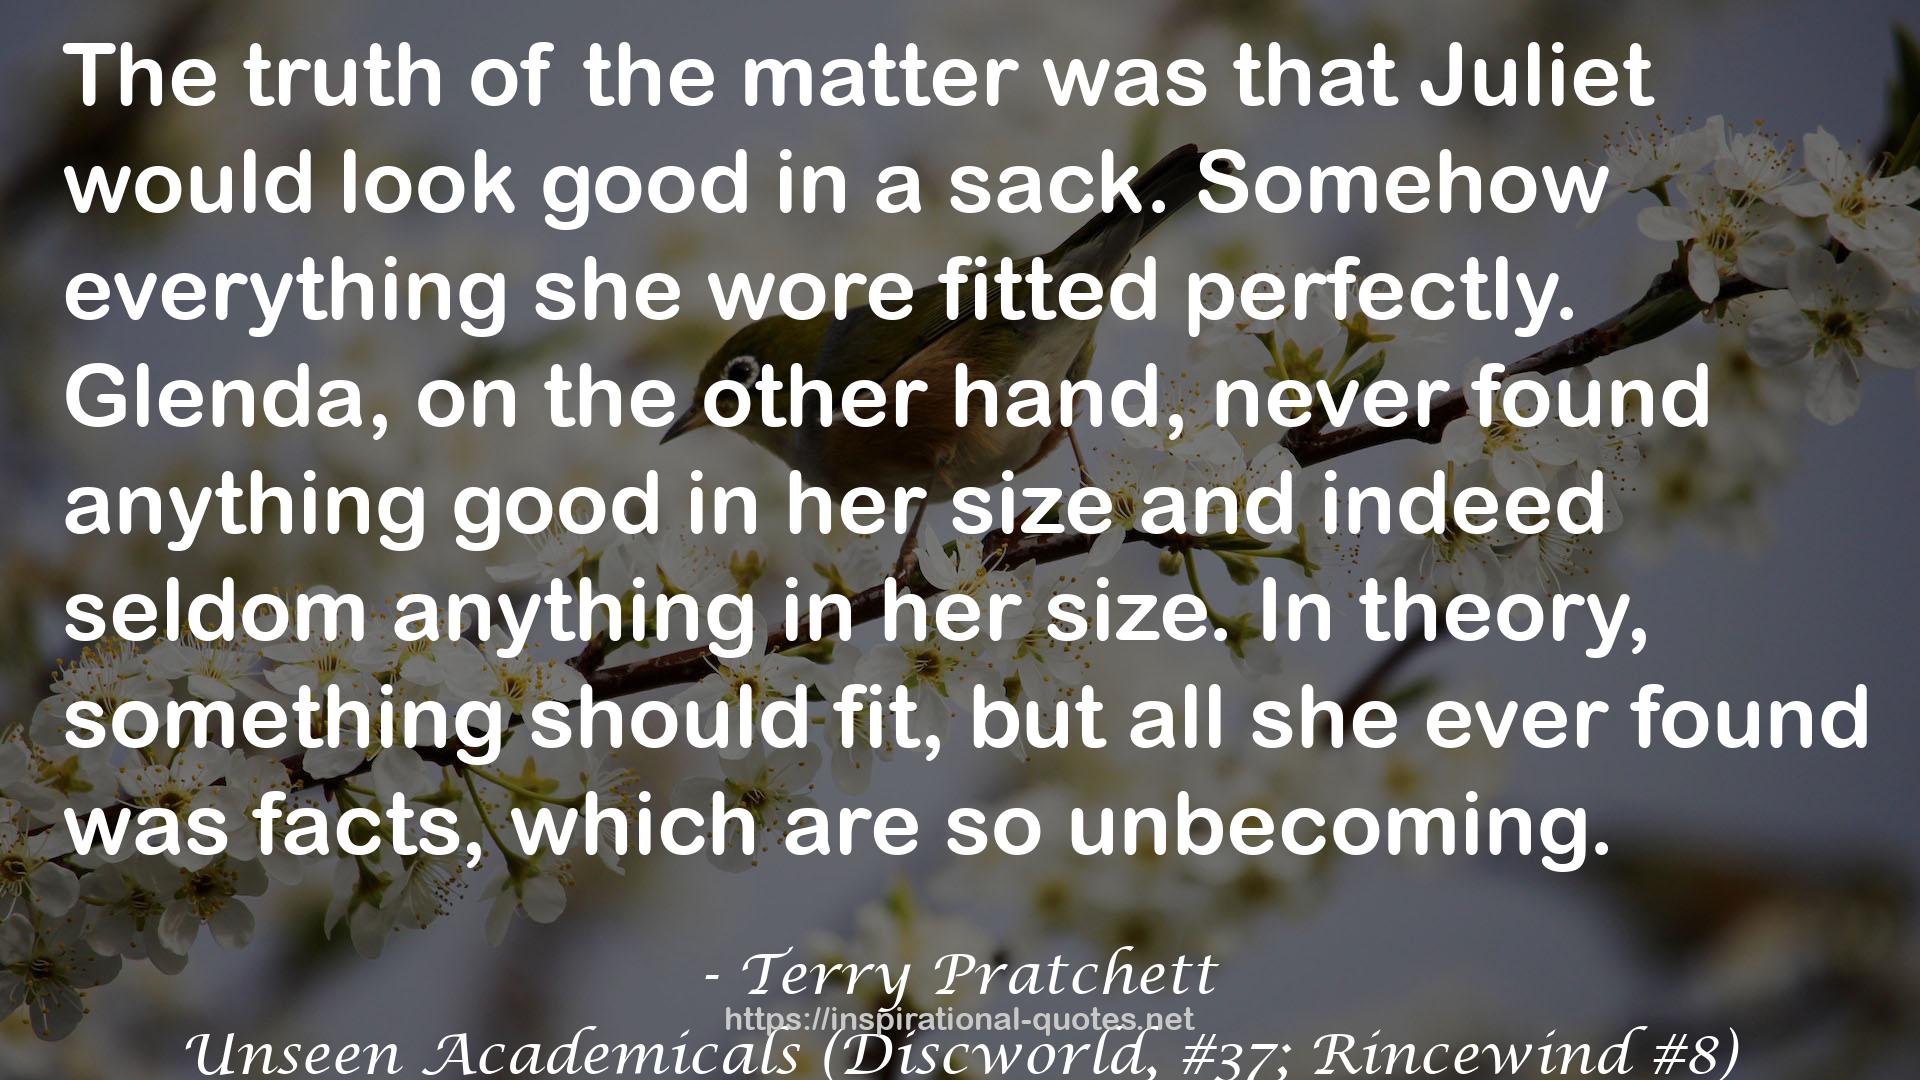 Unseen Academicals (Discworld, #37; Rincewind #8) QUOTES